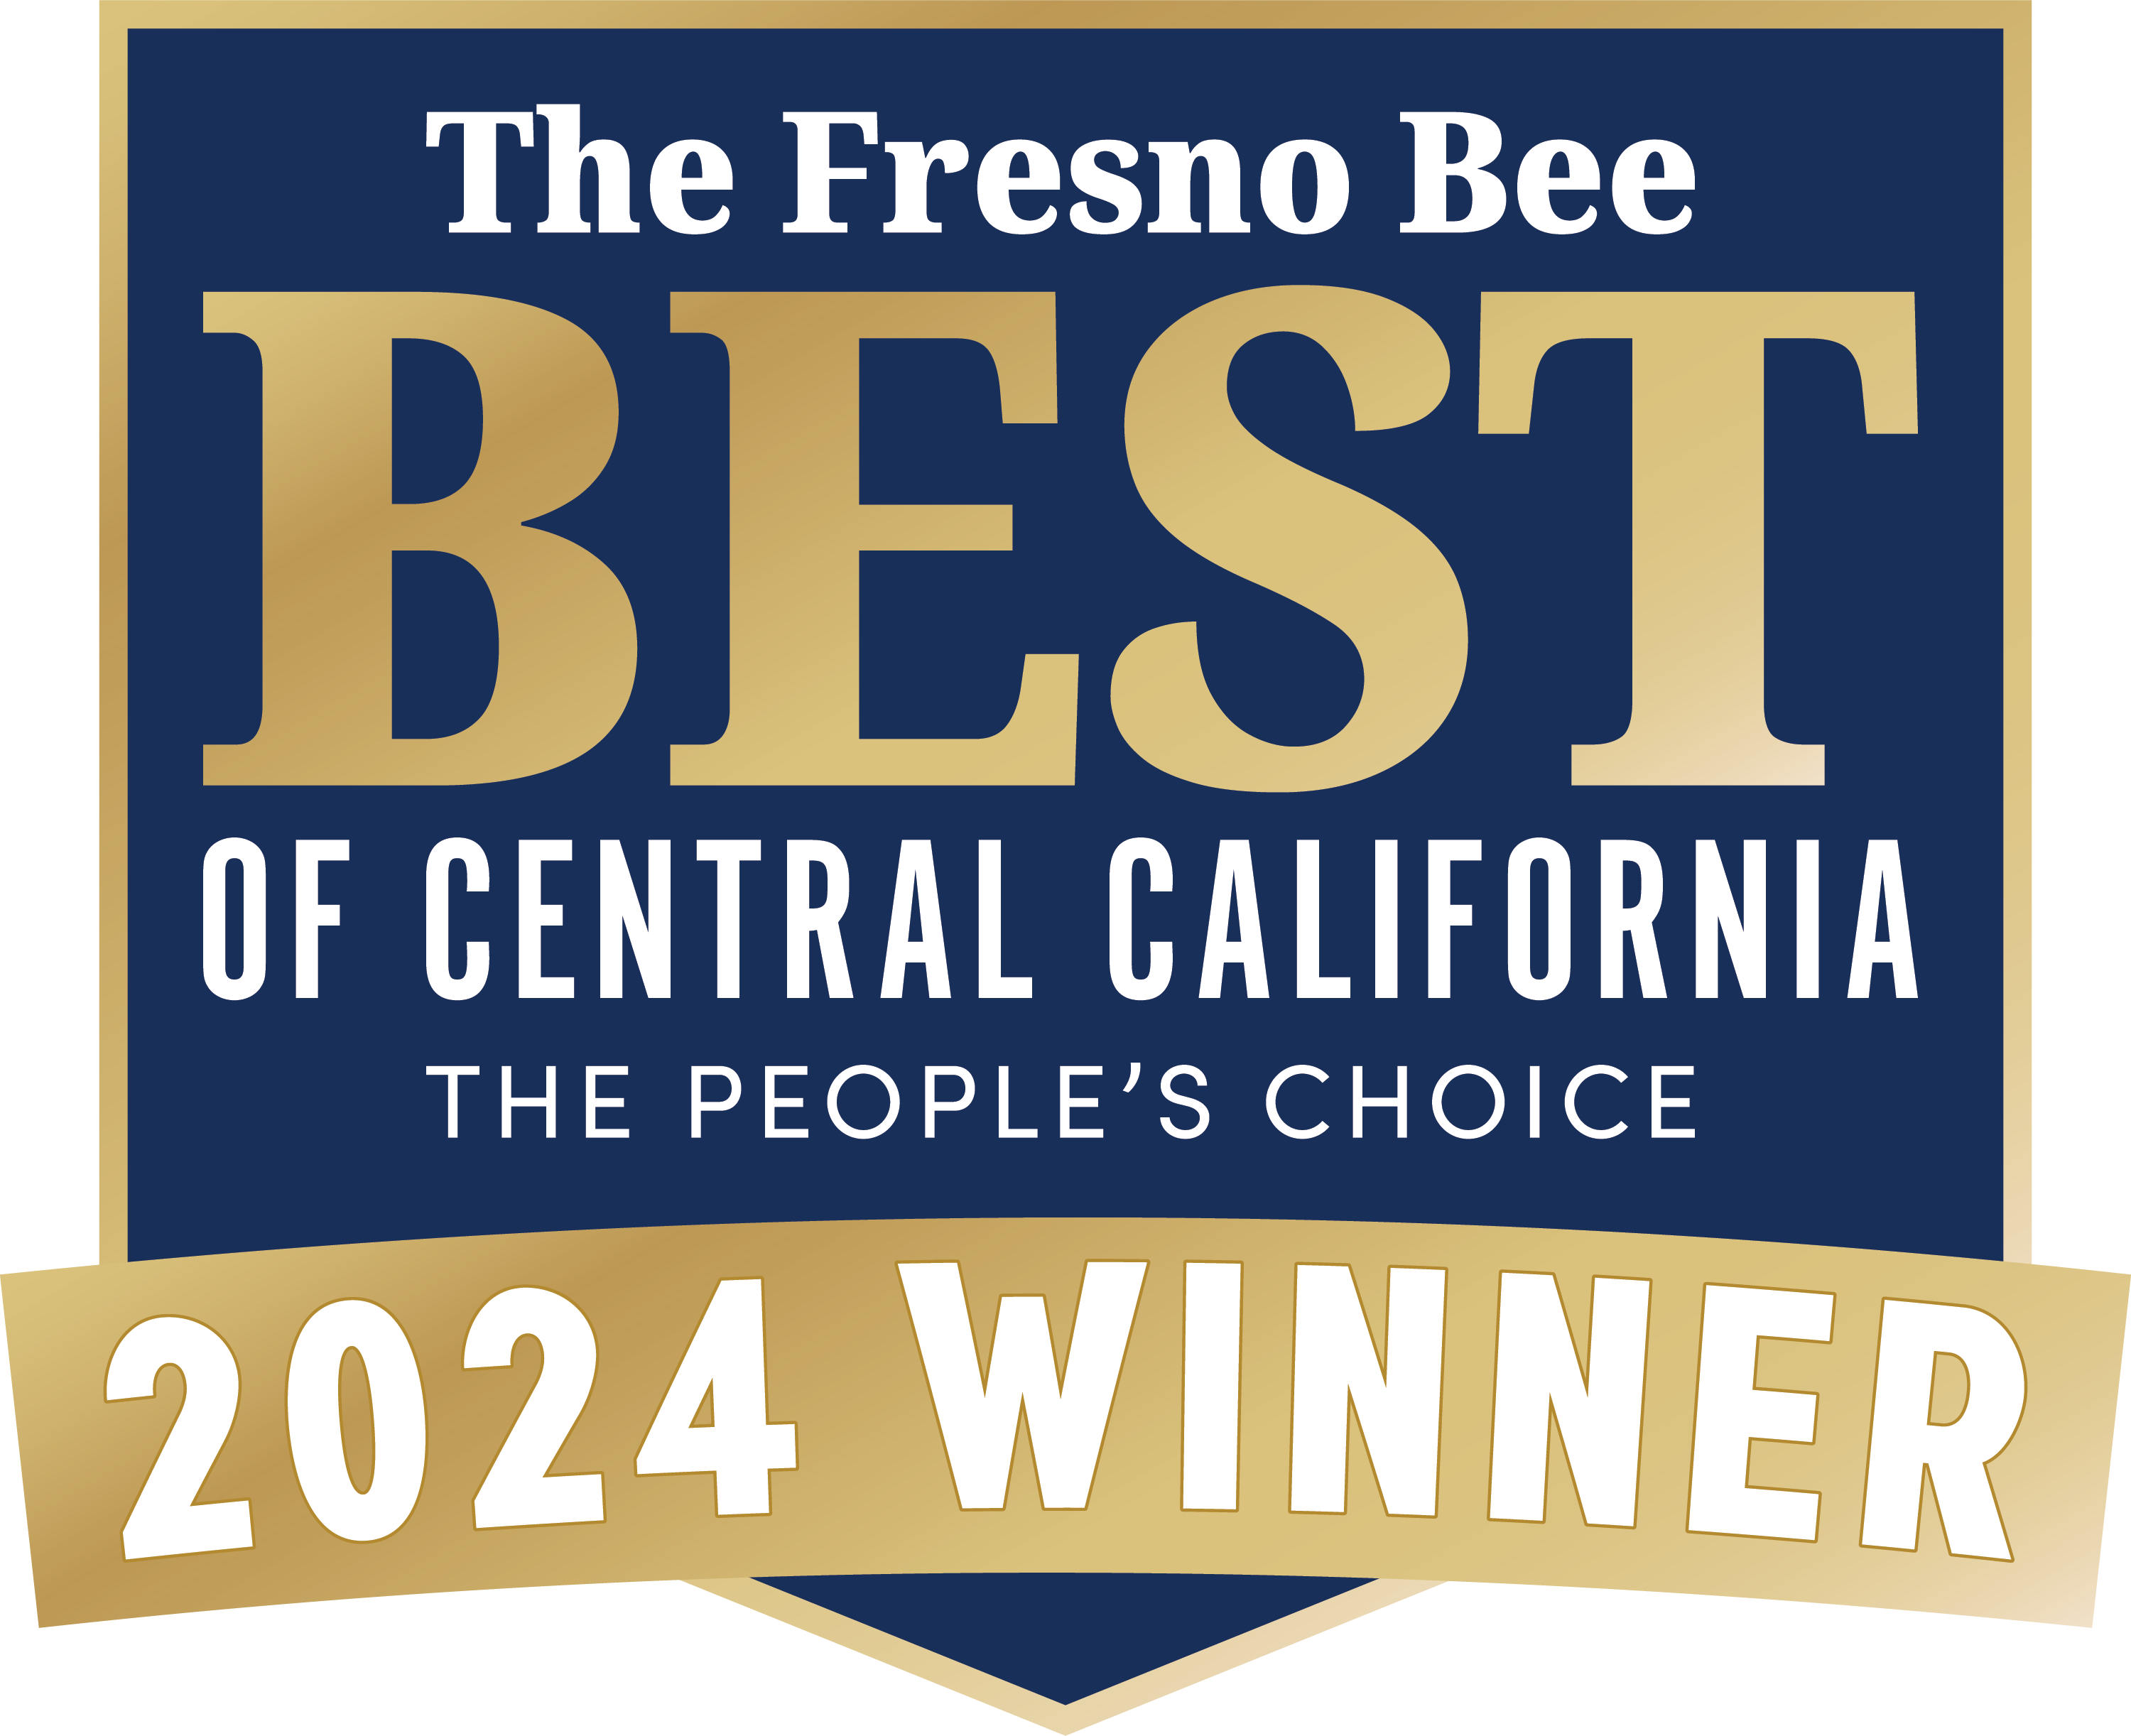 The Fresno Bee Best of Central California The People's Choice 2024 Winner